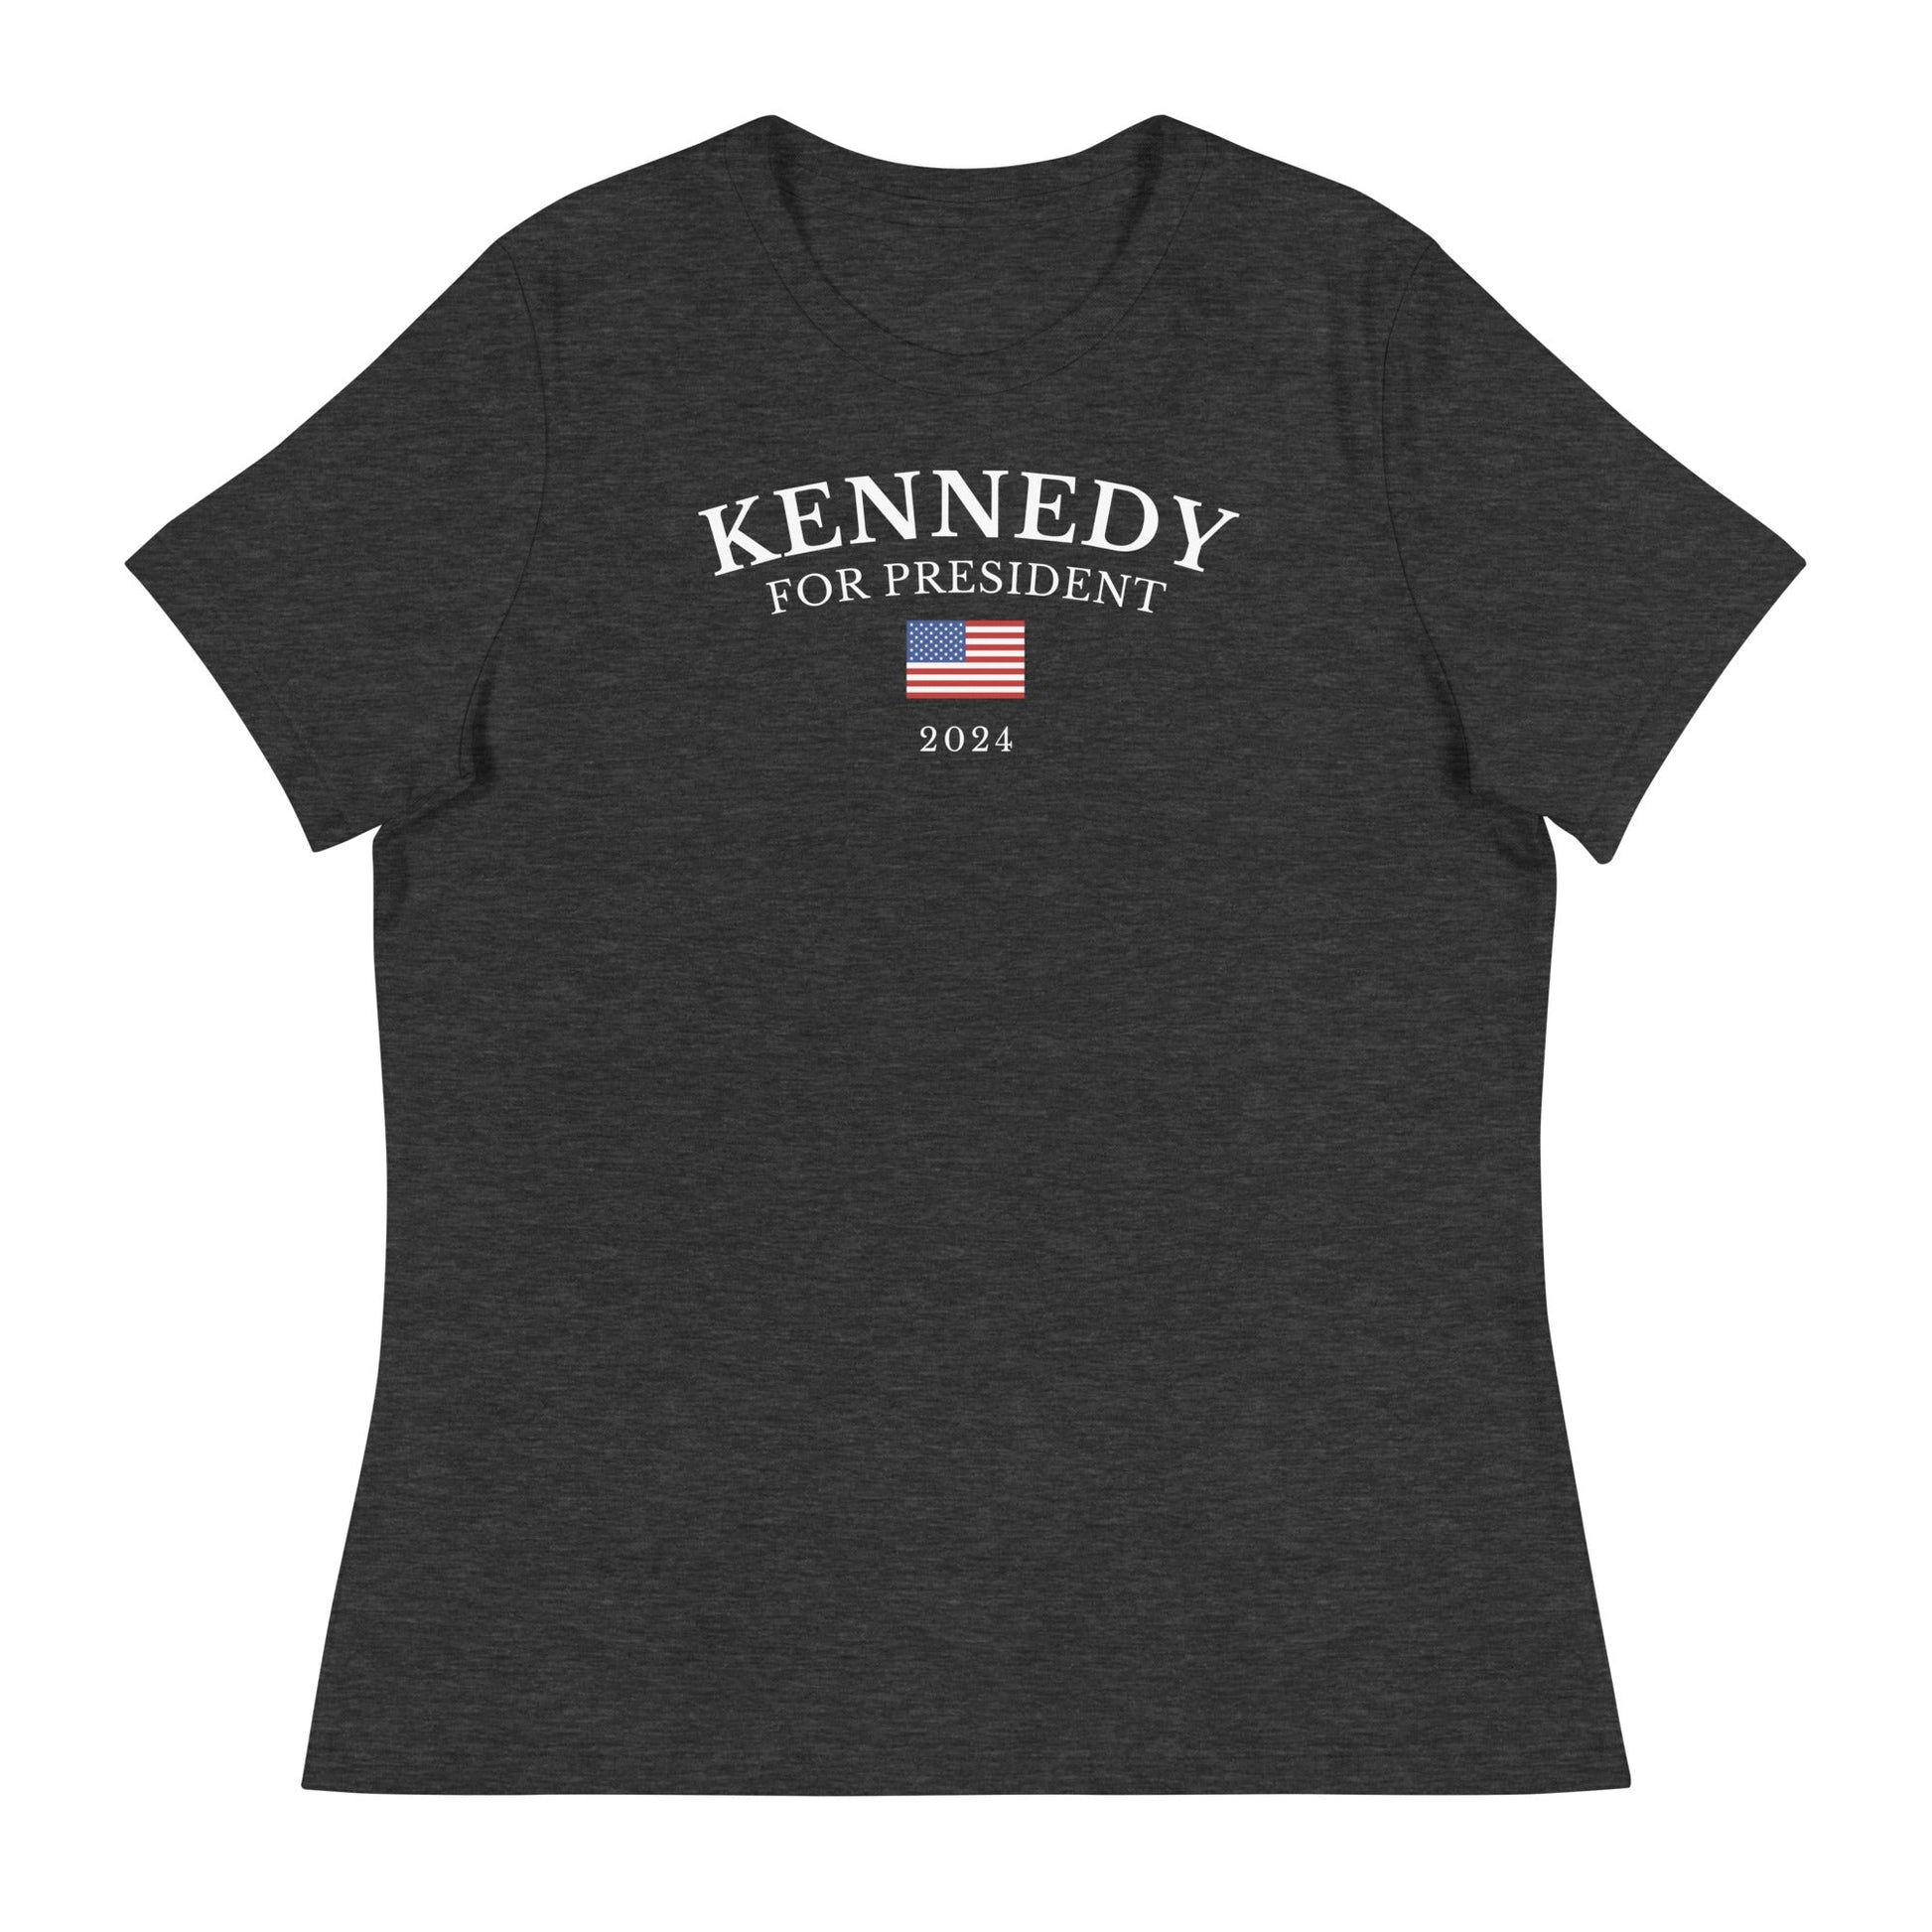 Kennedy for President USA Women's Relaxed Tee - TEAM KENNEDY. All rights reserved